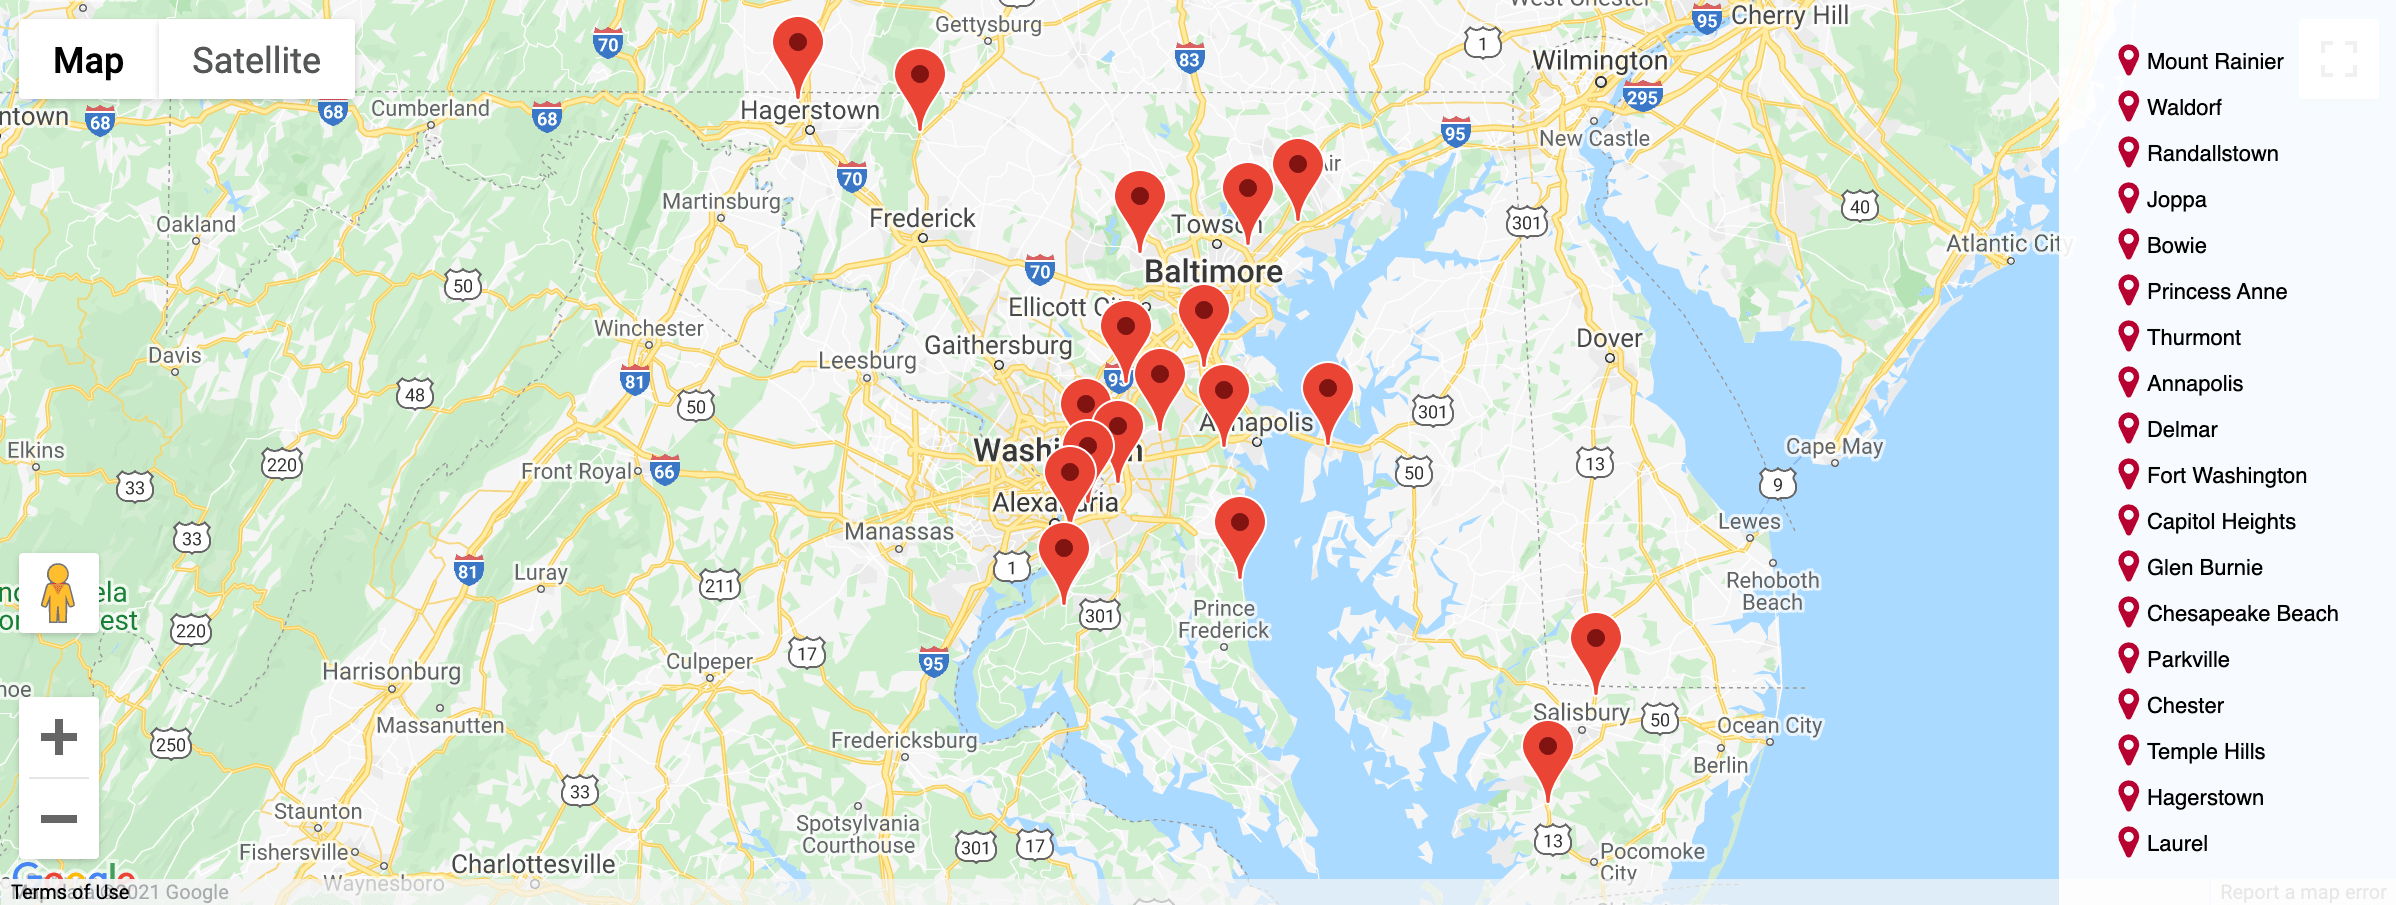 map of Maryland Auto Insurance My MD Auto